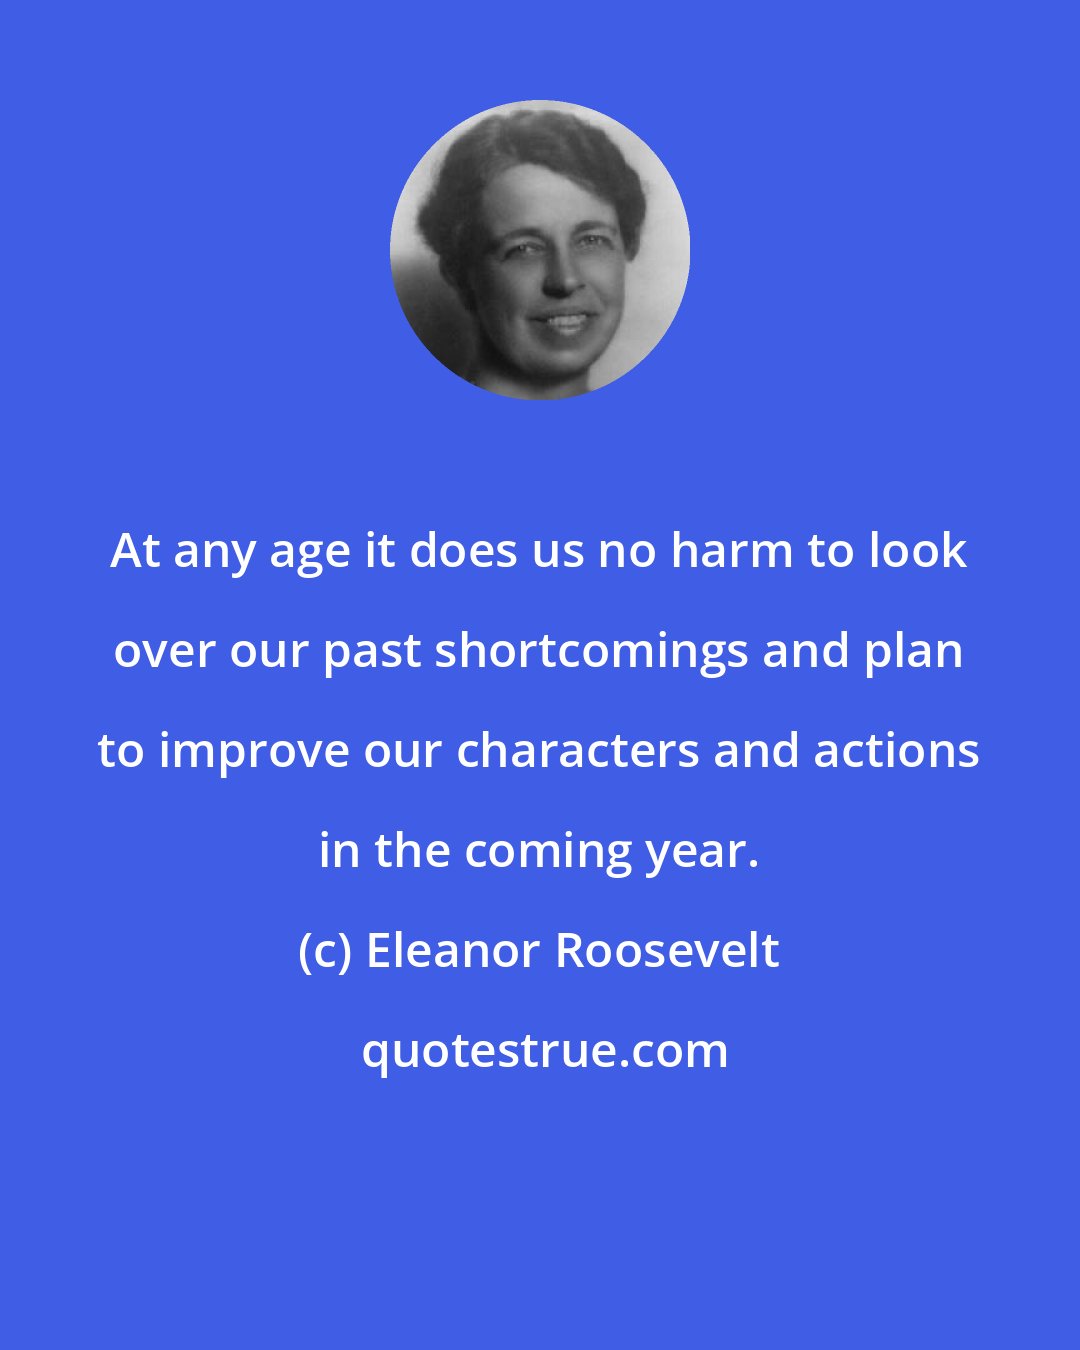 Eleanor Roosevelt: At any age it does us no harm to look over our past shortcomings and plan to improve our characters and actions in the coming year.